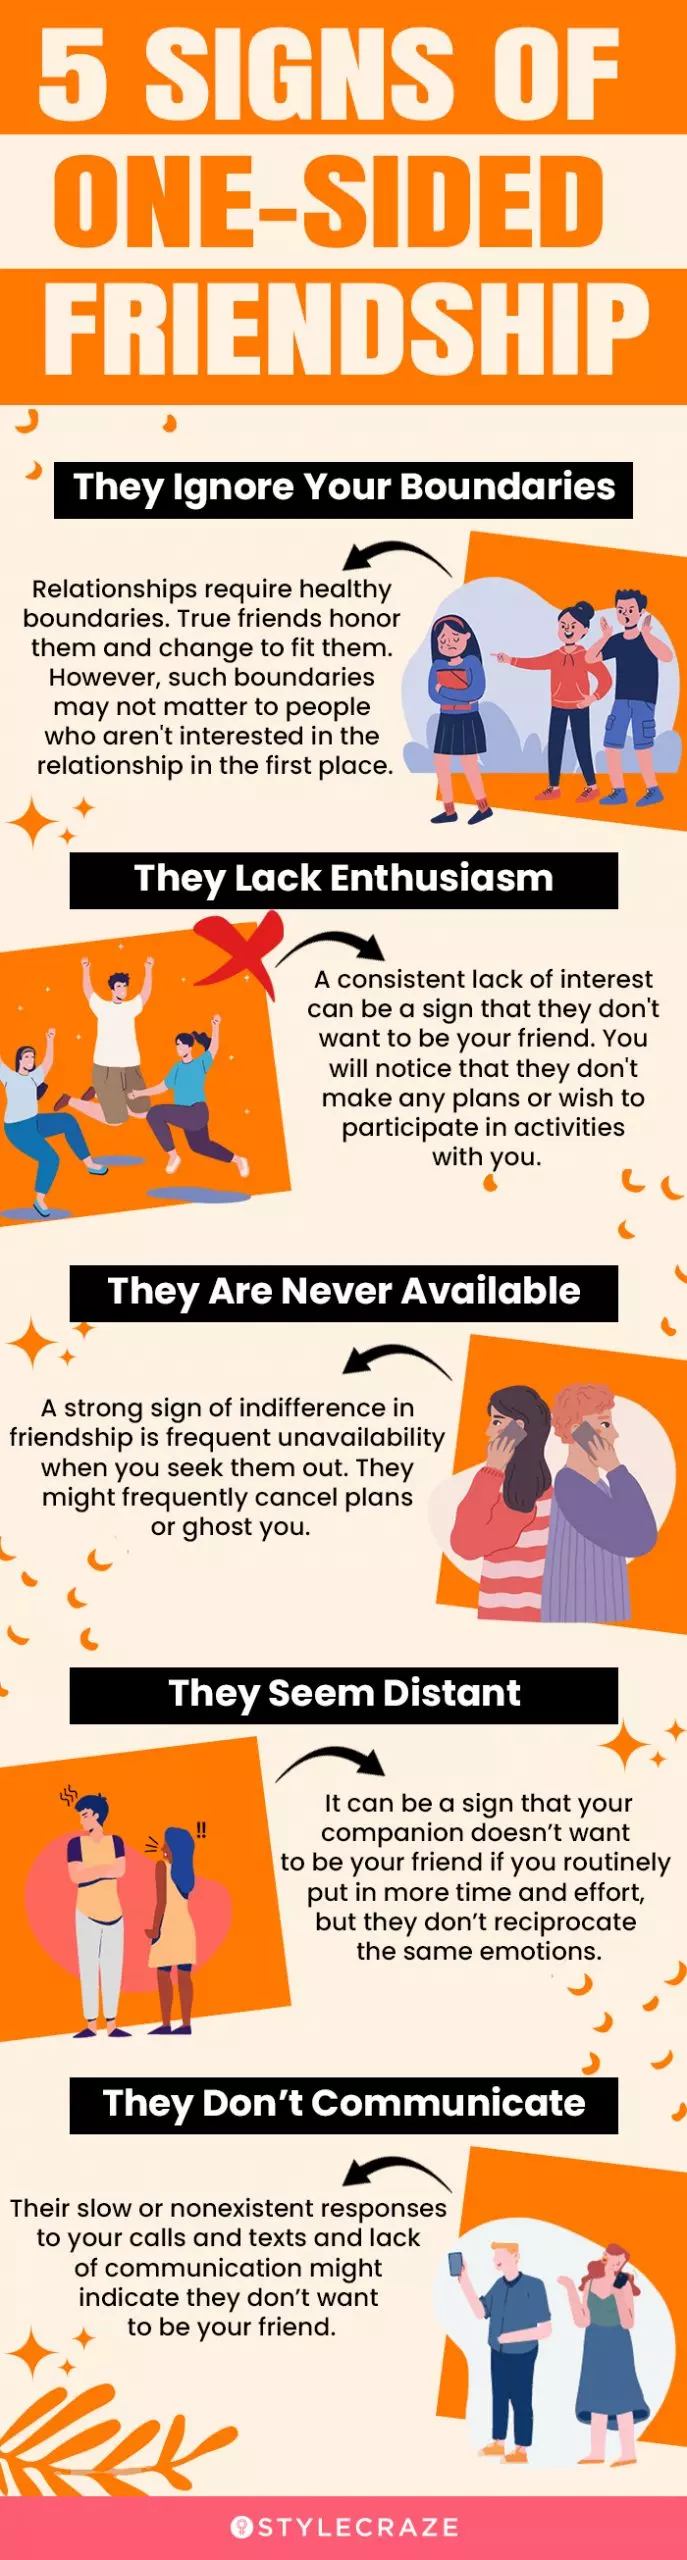 5 signs of one sided friendship (infographic)